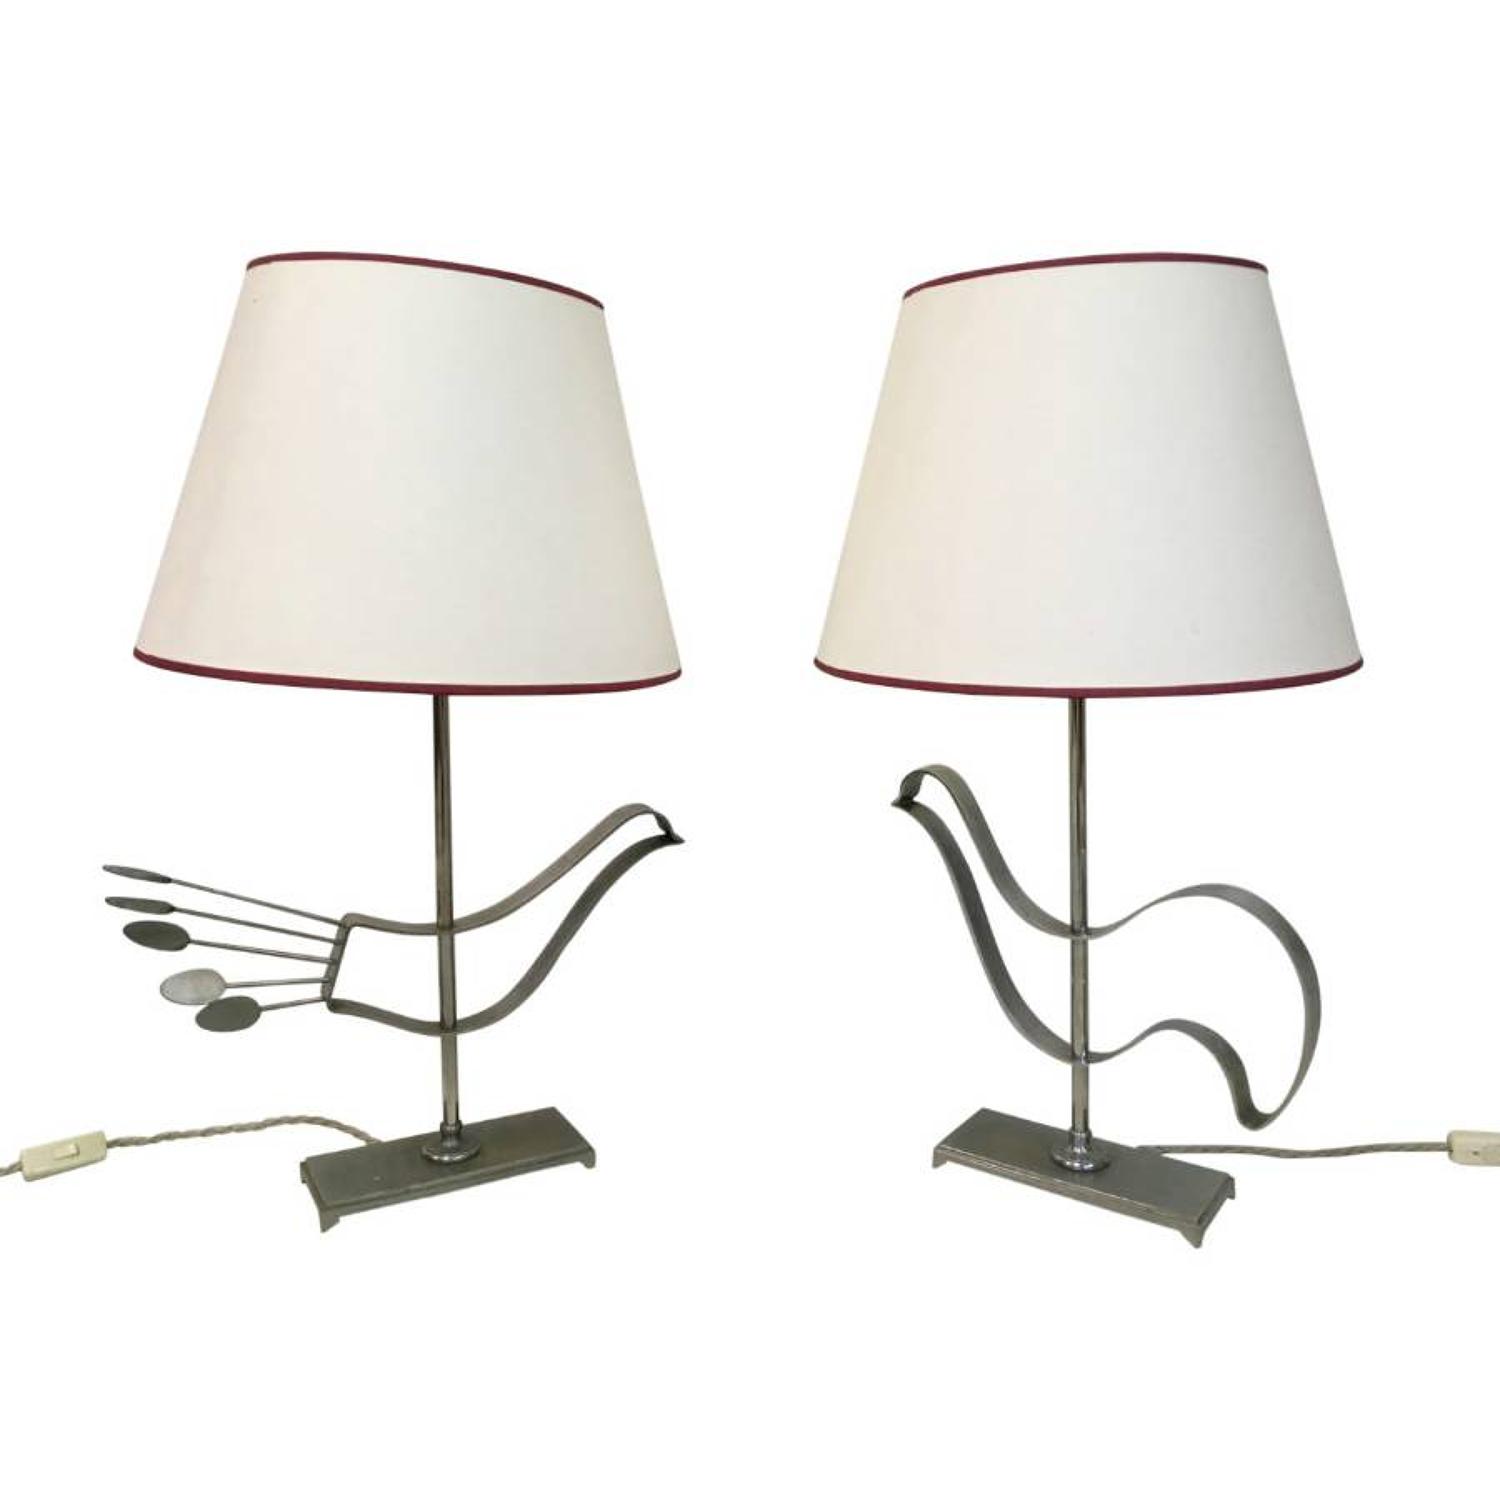 A pair of French steel abstract bird lamps